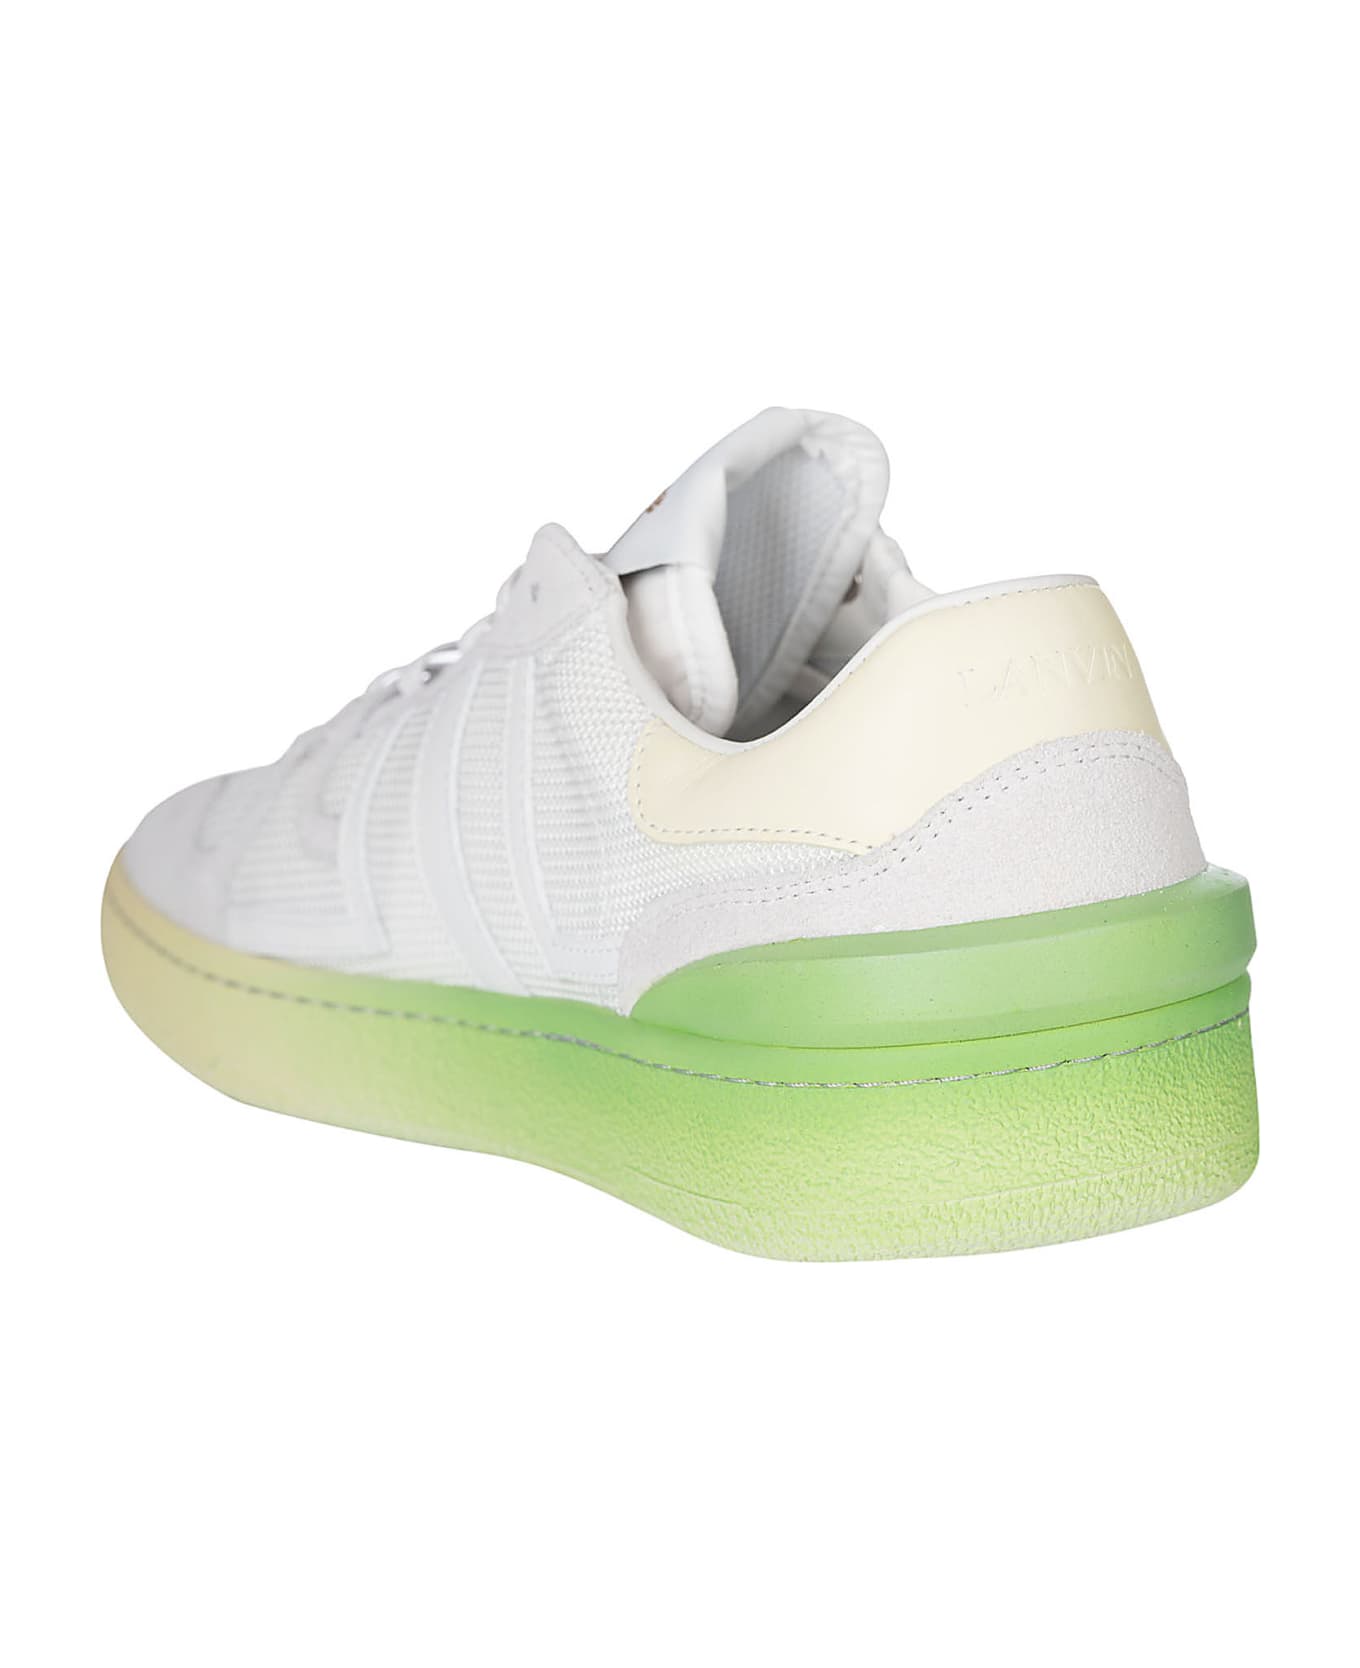 Lanvin Clay Low Top Sneakers - White/Yellow